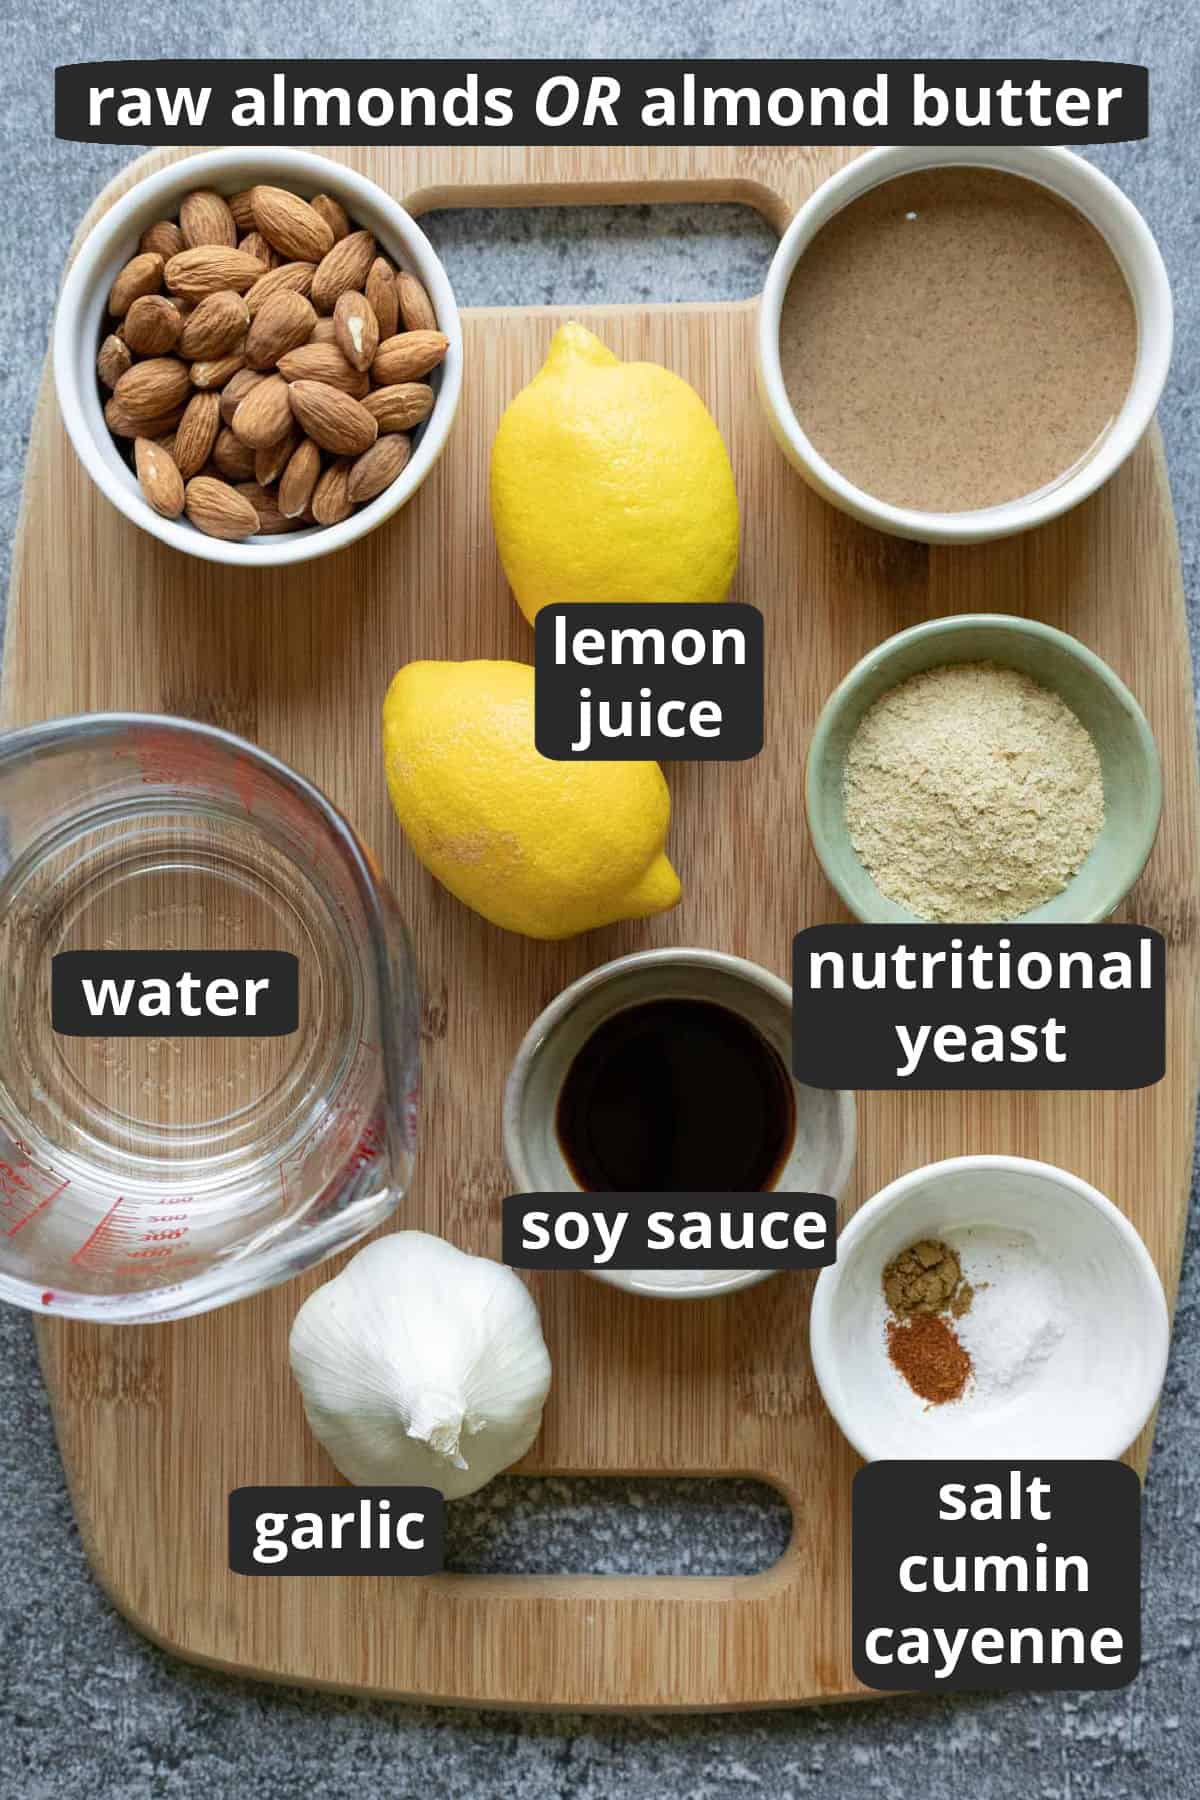 labeled photo of the 8 ingredients needed to make Bitchin Sauce at home.